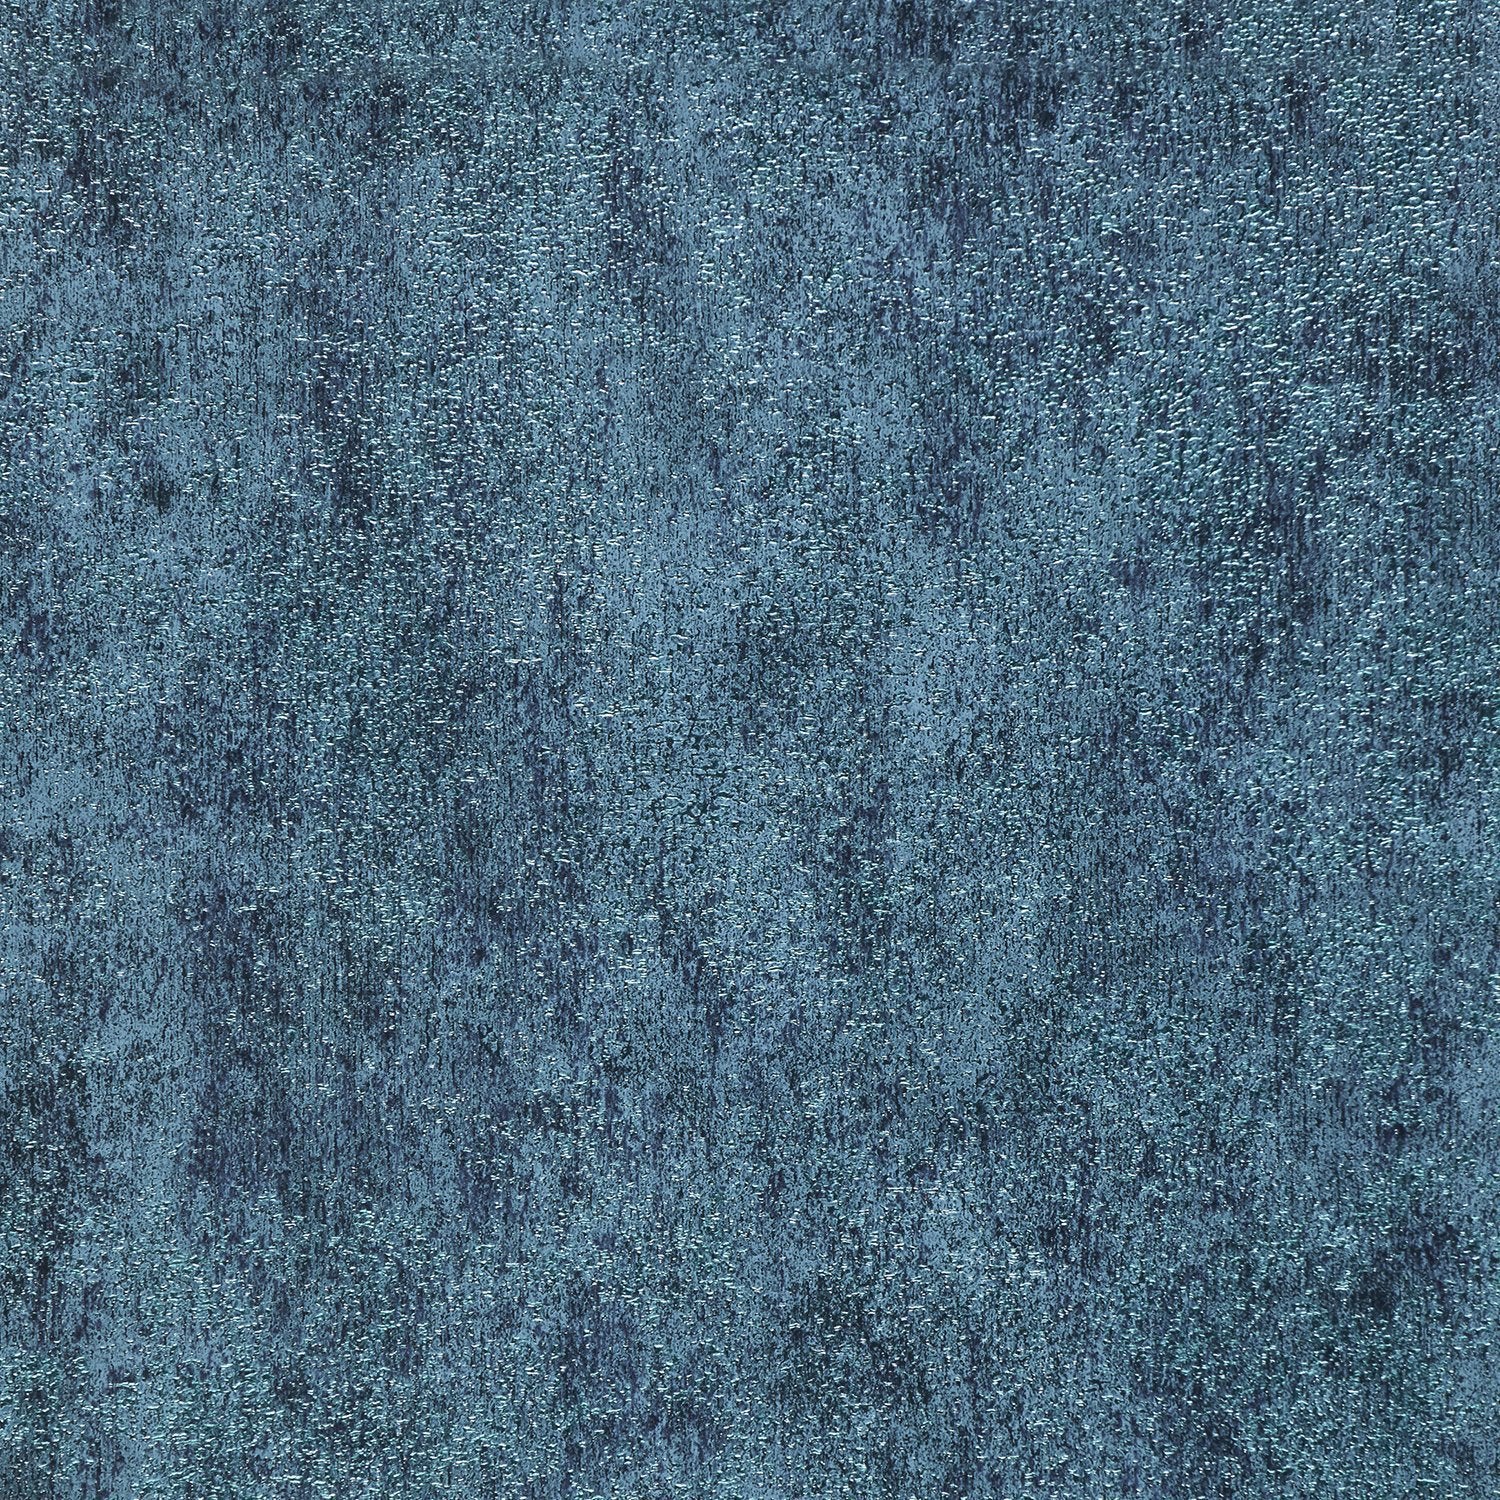 Patina Stone - Y47480 - Wallcovering - Vycon - Kube Contract